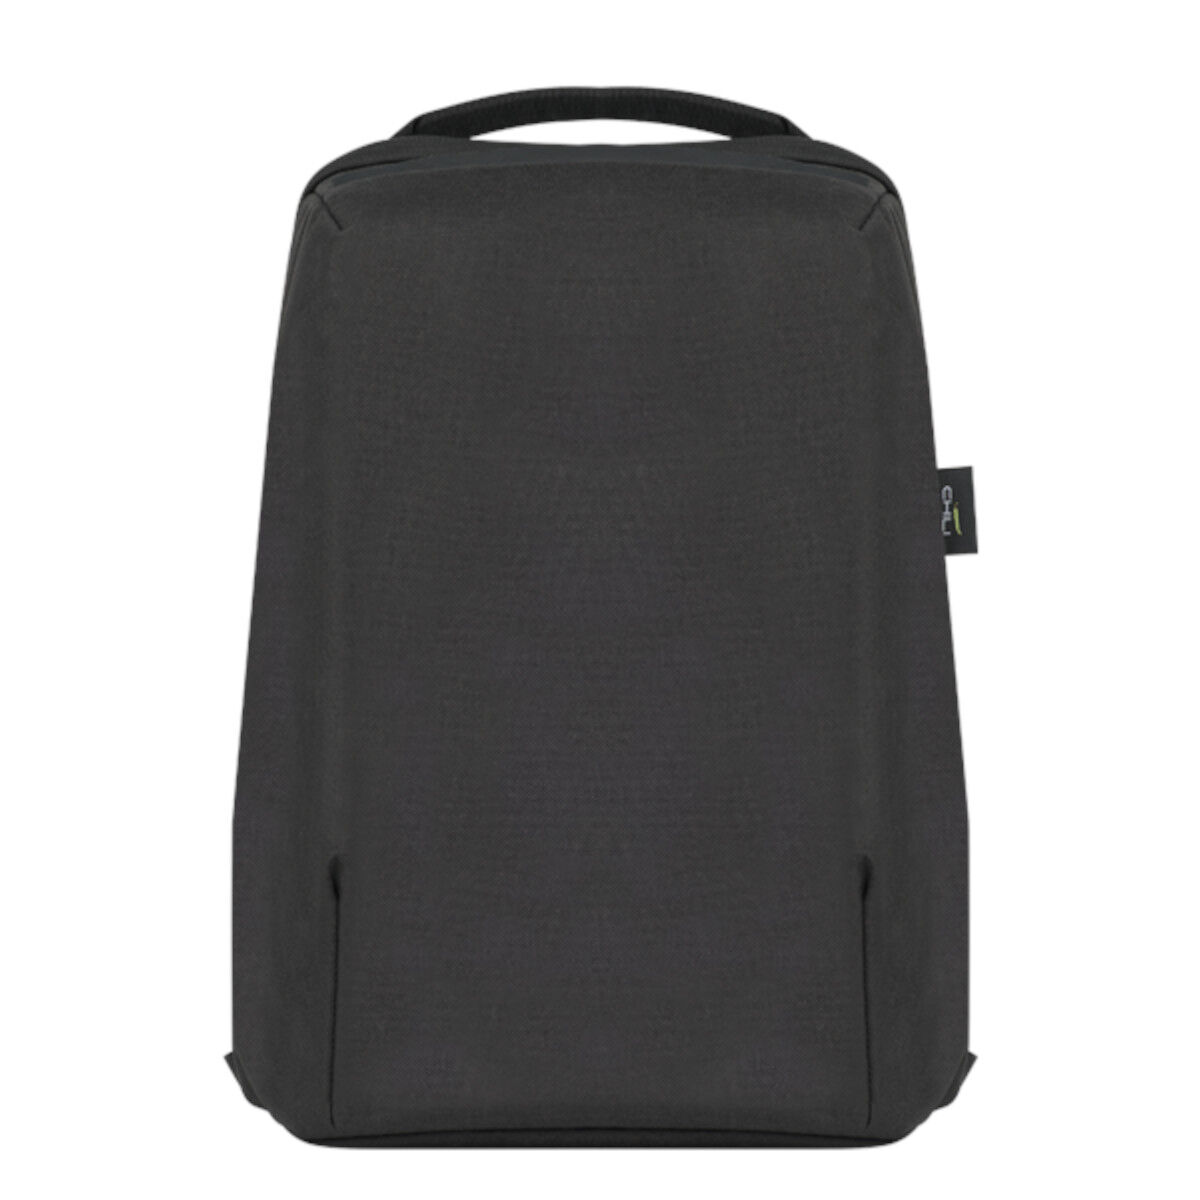 Anti-Theft Recycled RPET Backpack